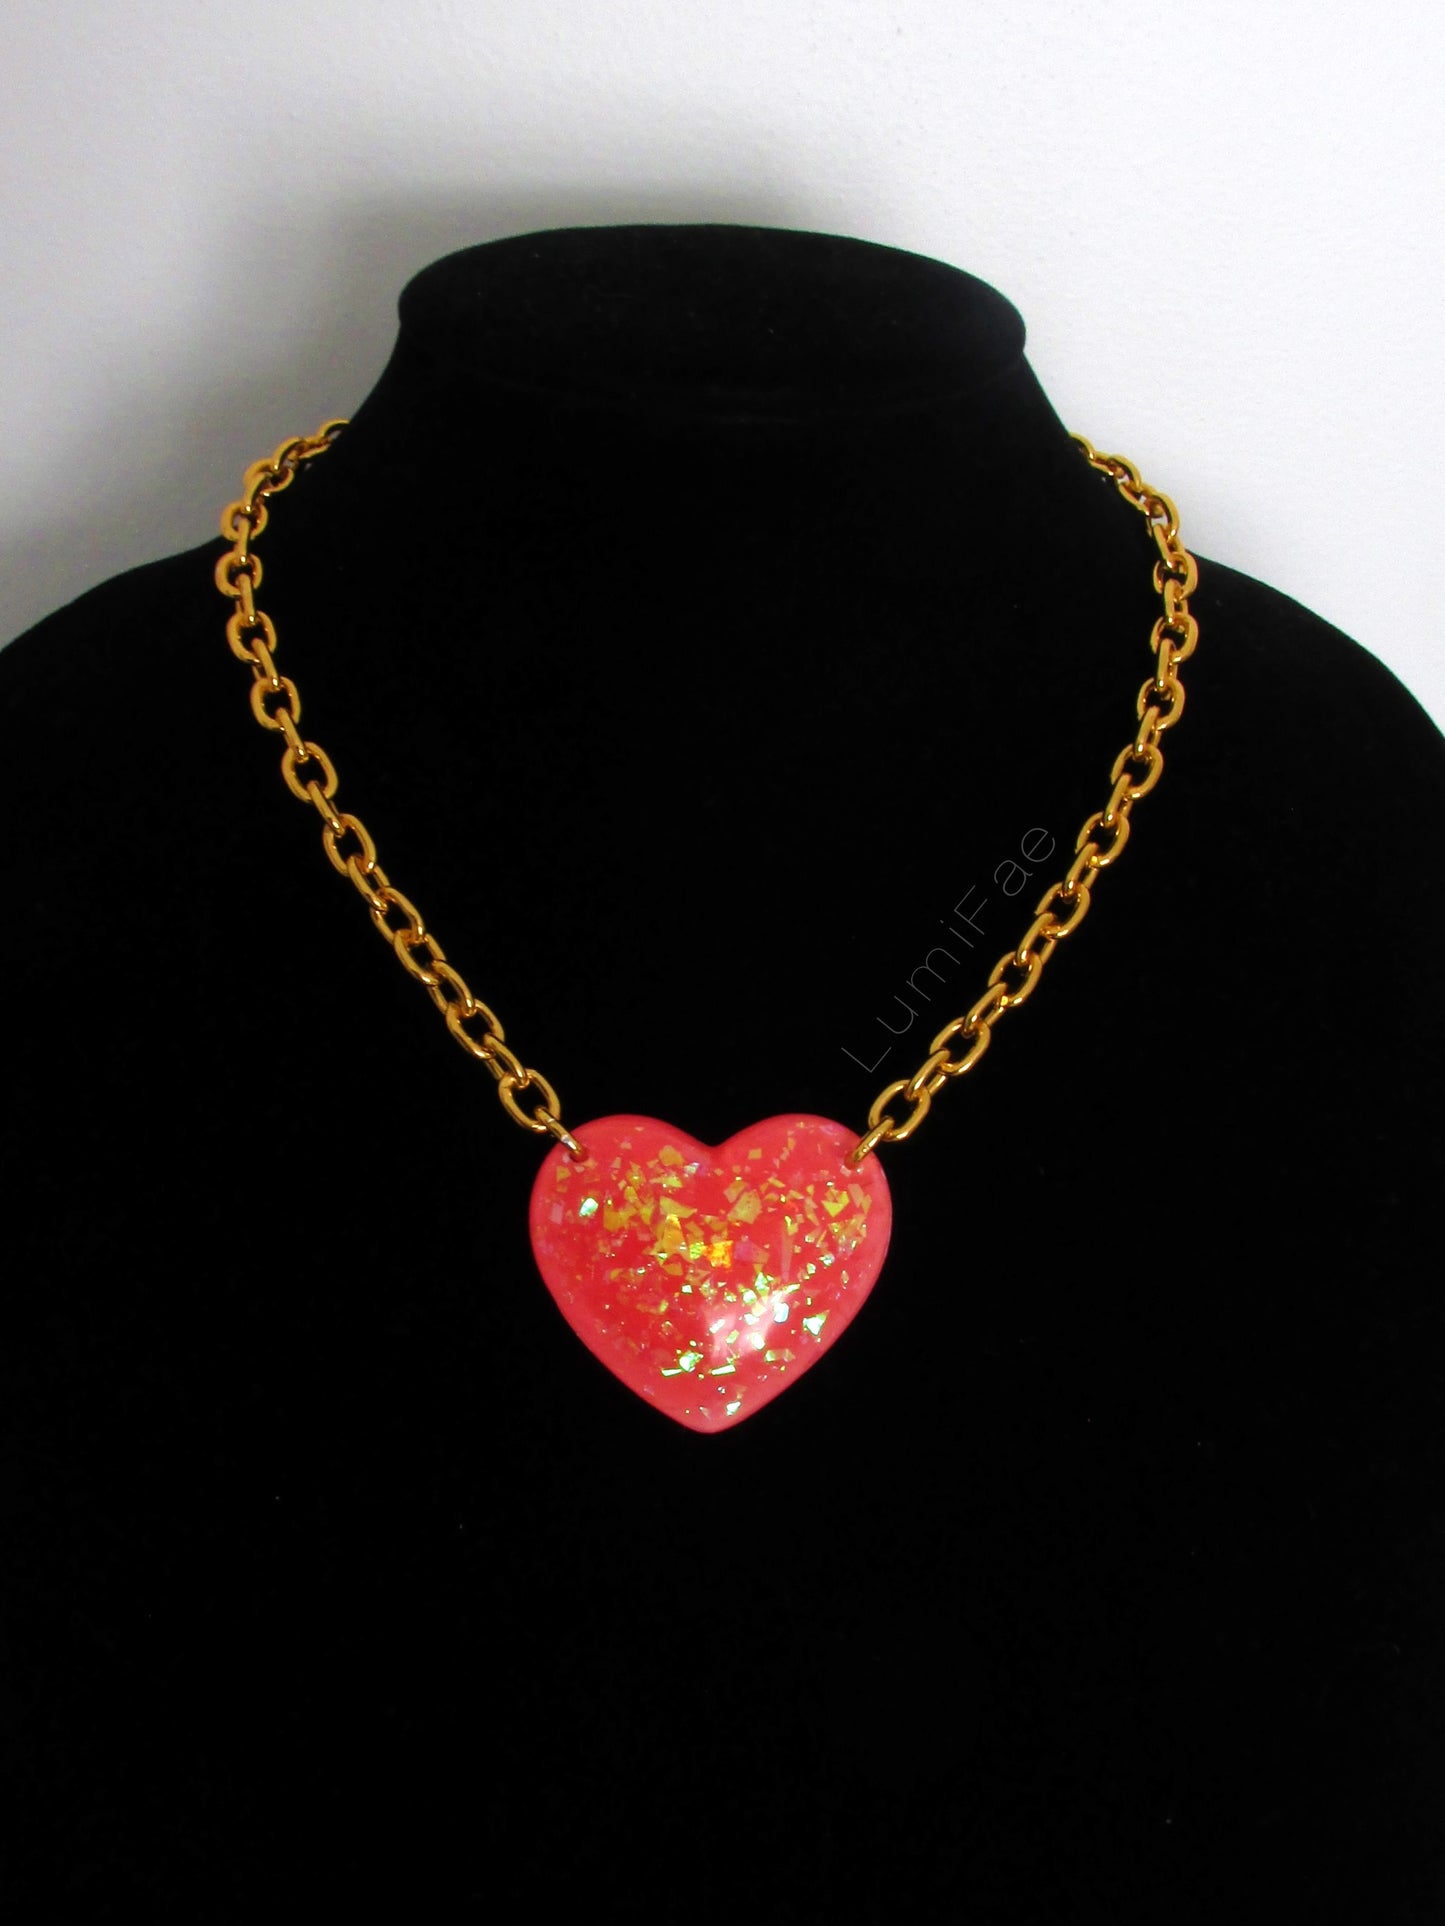 Big Pink Sparkly Heart Pendant on Lightweight Gold Aluminum Chain, 2”